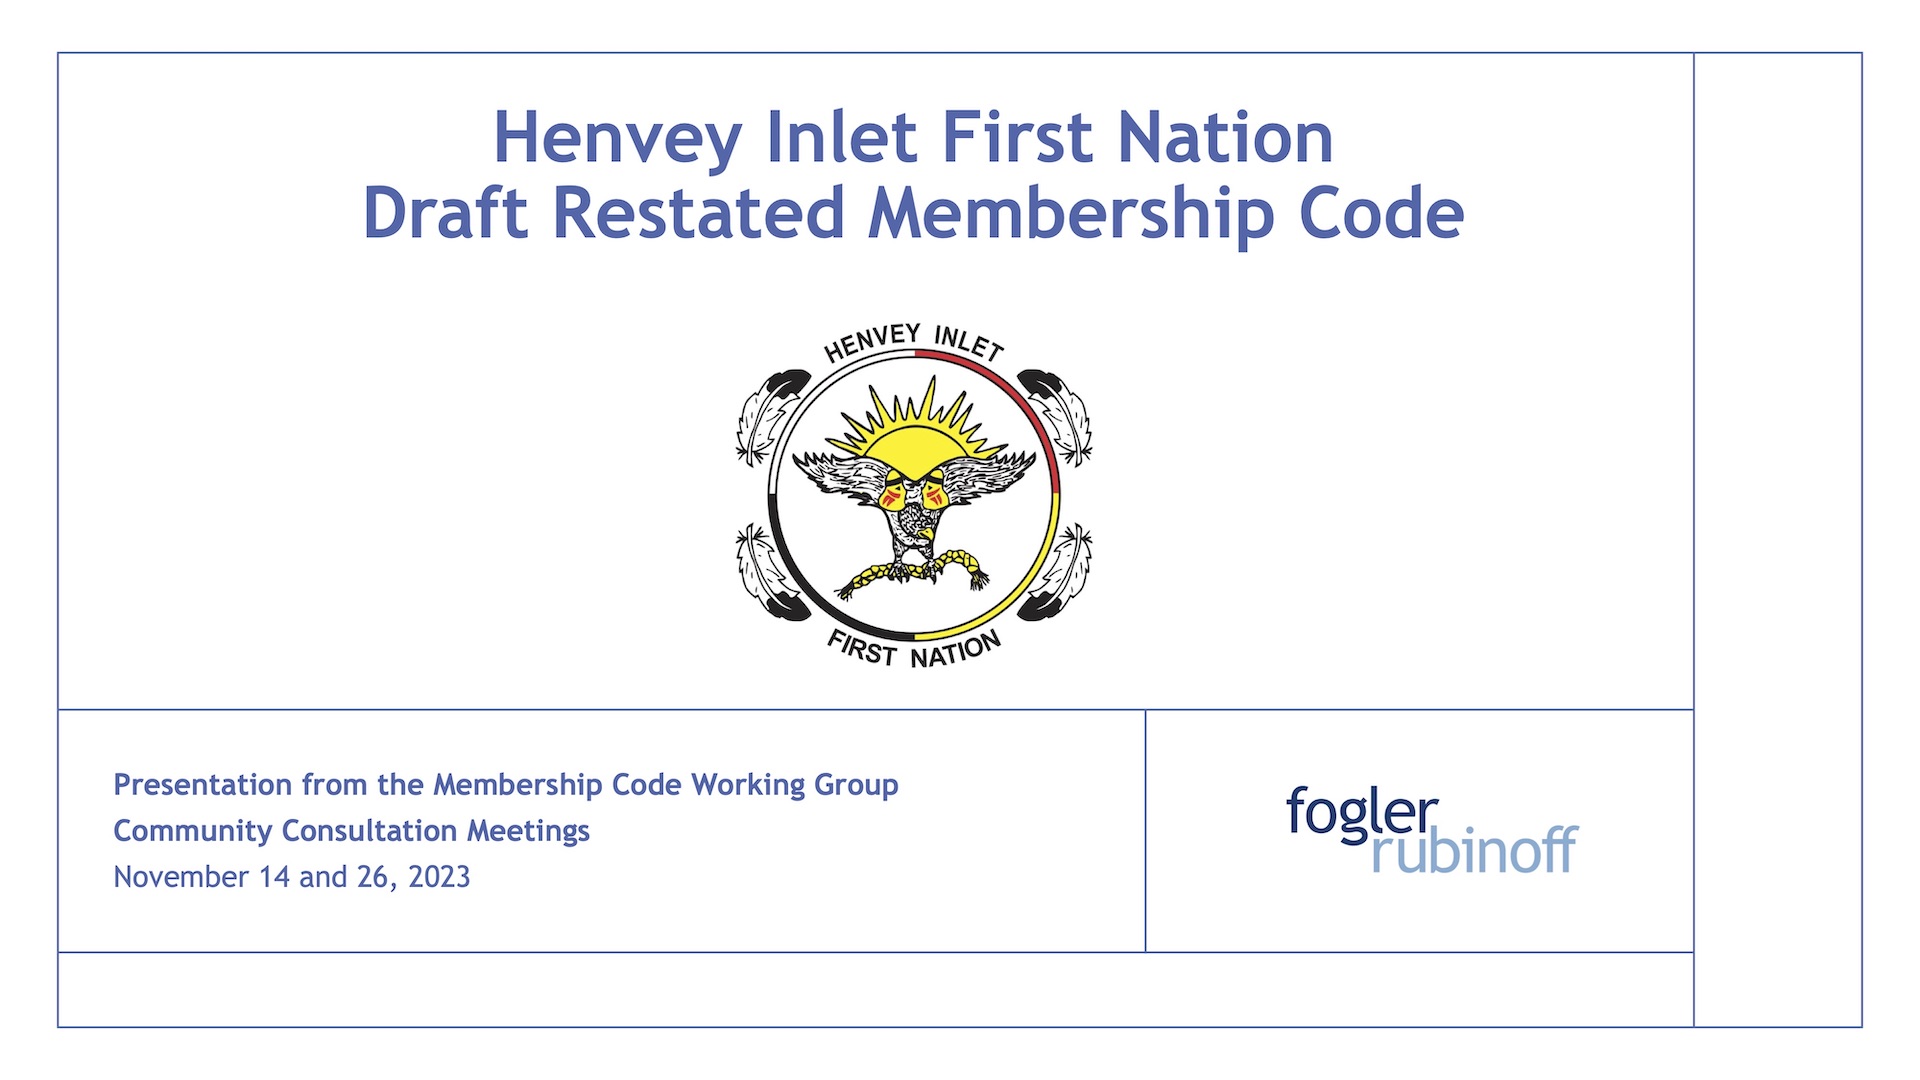 Henvey Inlet First Nation Draft Restated Membership Code Presentation from the Membership Code Working Group Community Consultation Meetings November 14 and 26, 2023